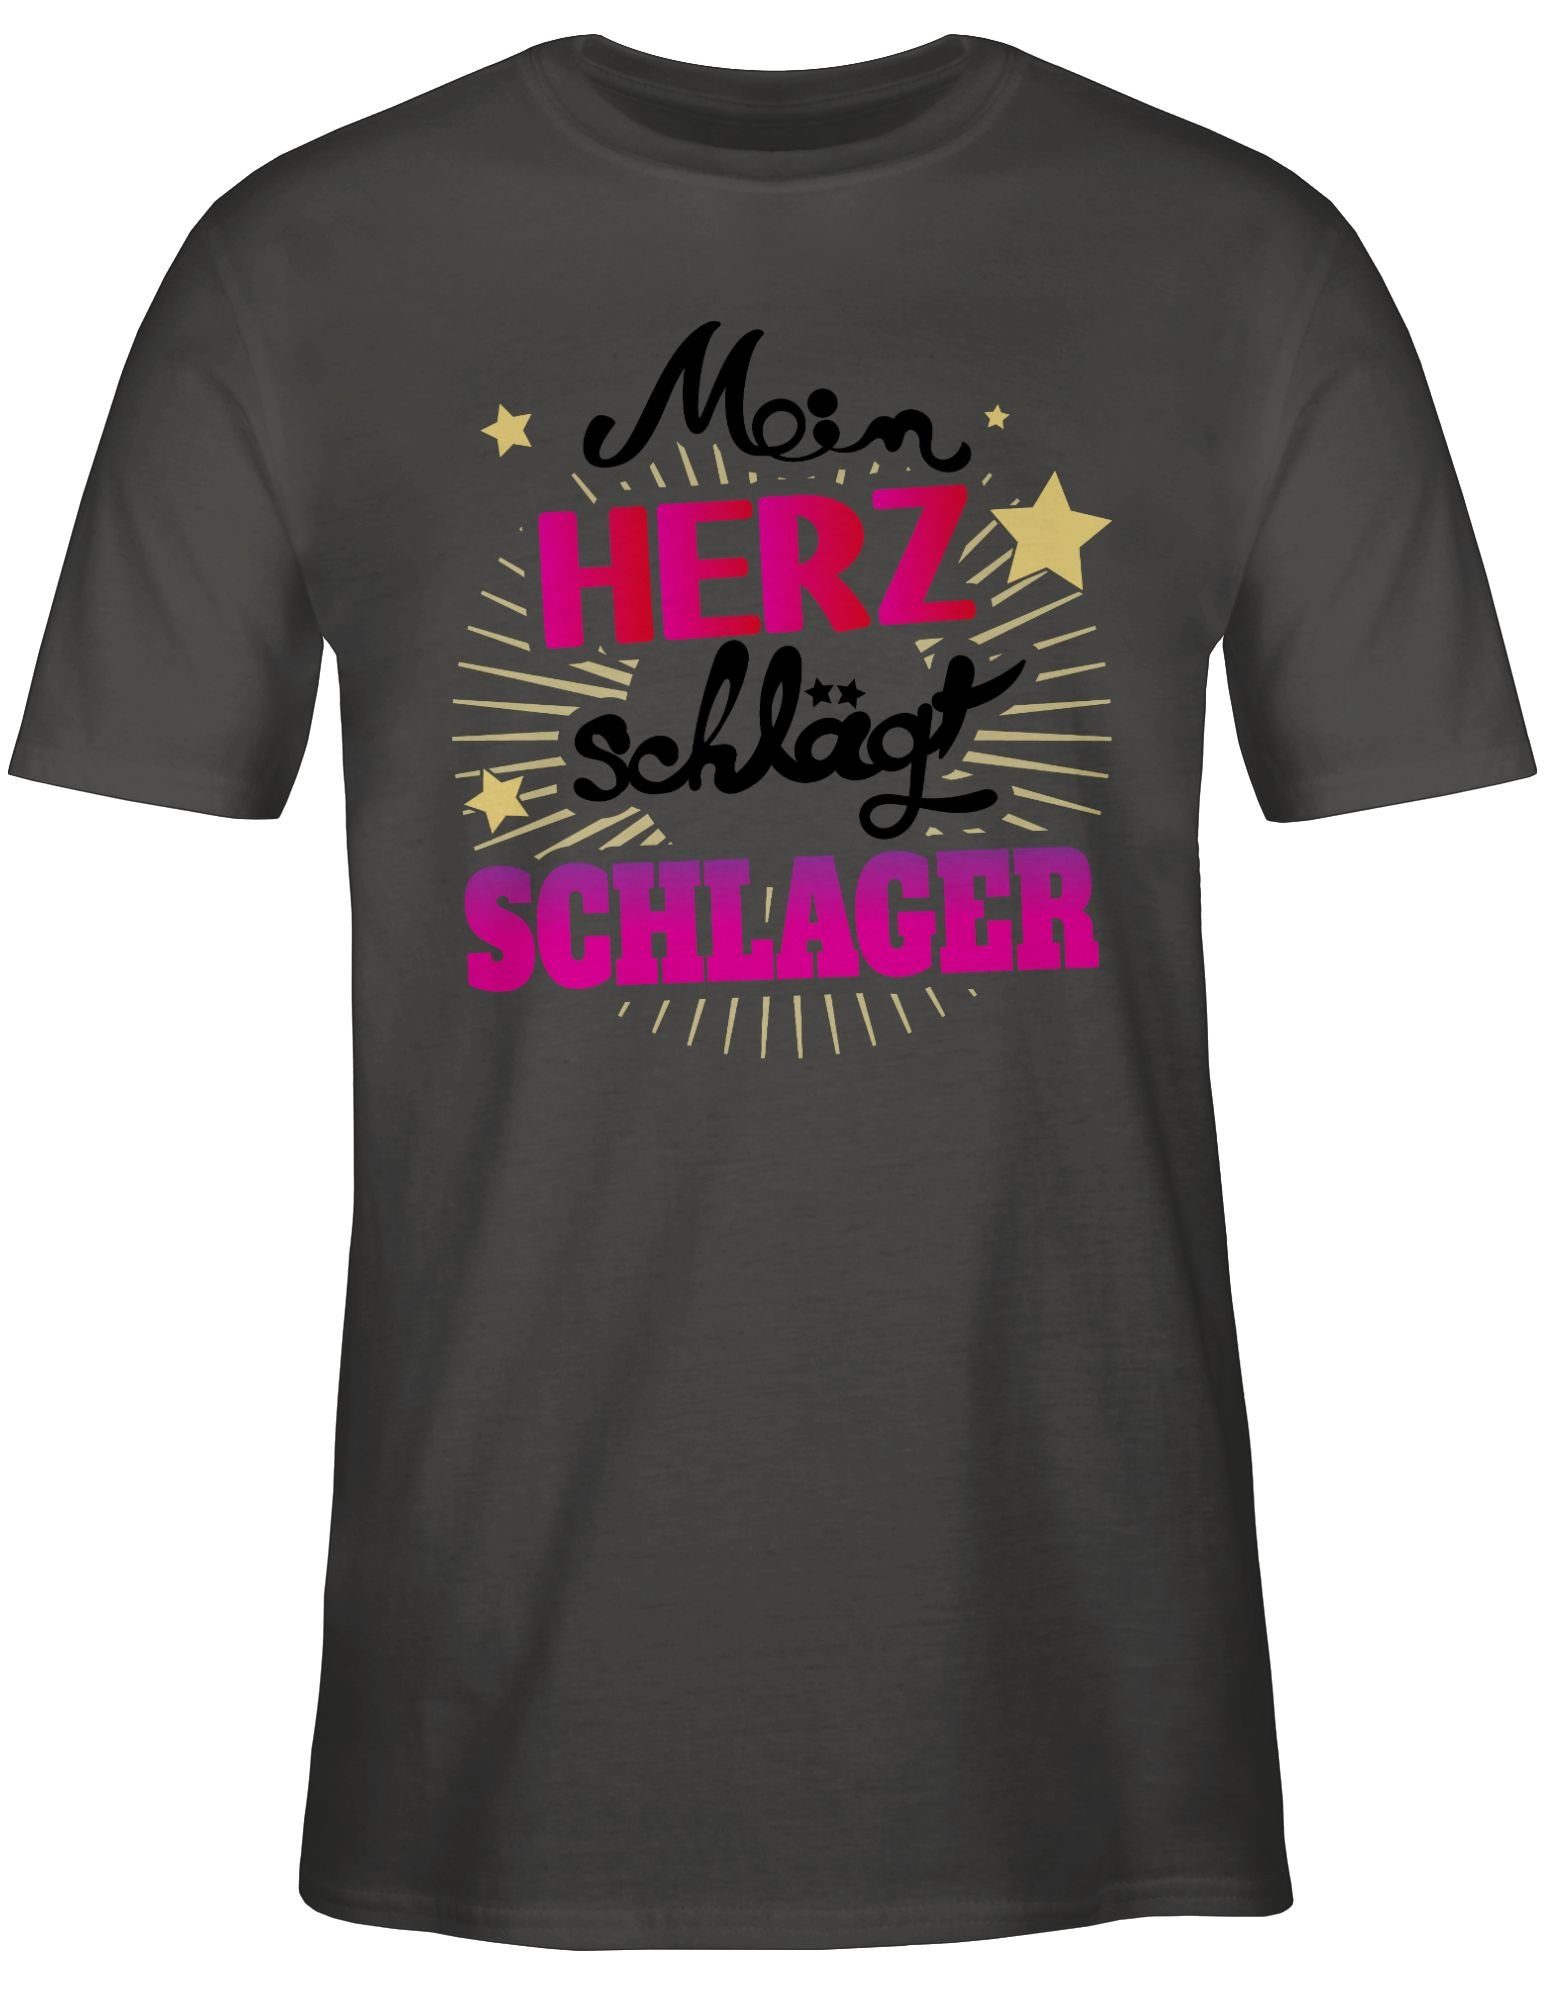 Dunkelgrau Schlagerparty Outfit Herz T-Shirt Schlager Shirtracer 2 Party Outfit Mein schlägt Schlager